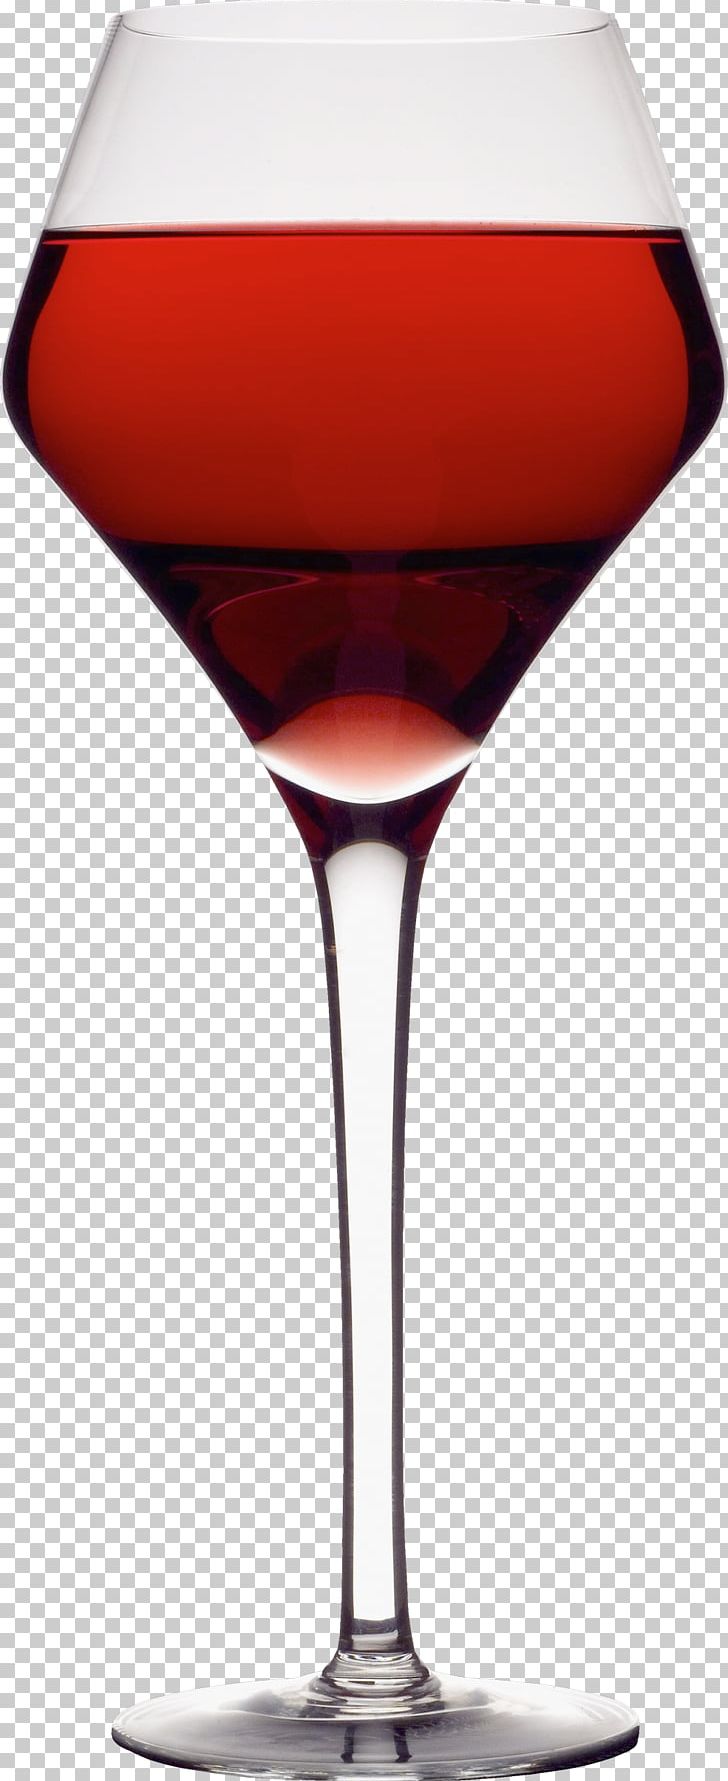 Wine Glass Wine Cocktail Champagne PNG, Clipart, Champagne, Champagne Stemware, Cocktail, Cocktail Garnish, Cocktail Glass Free PNG Download